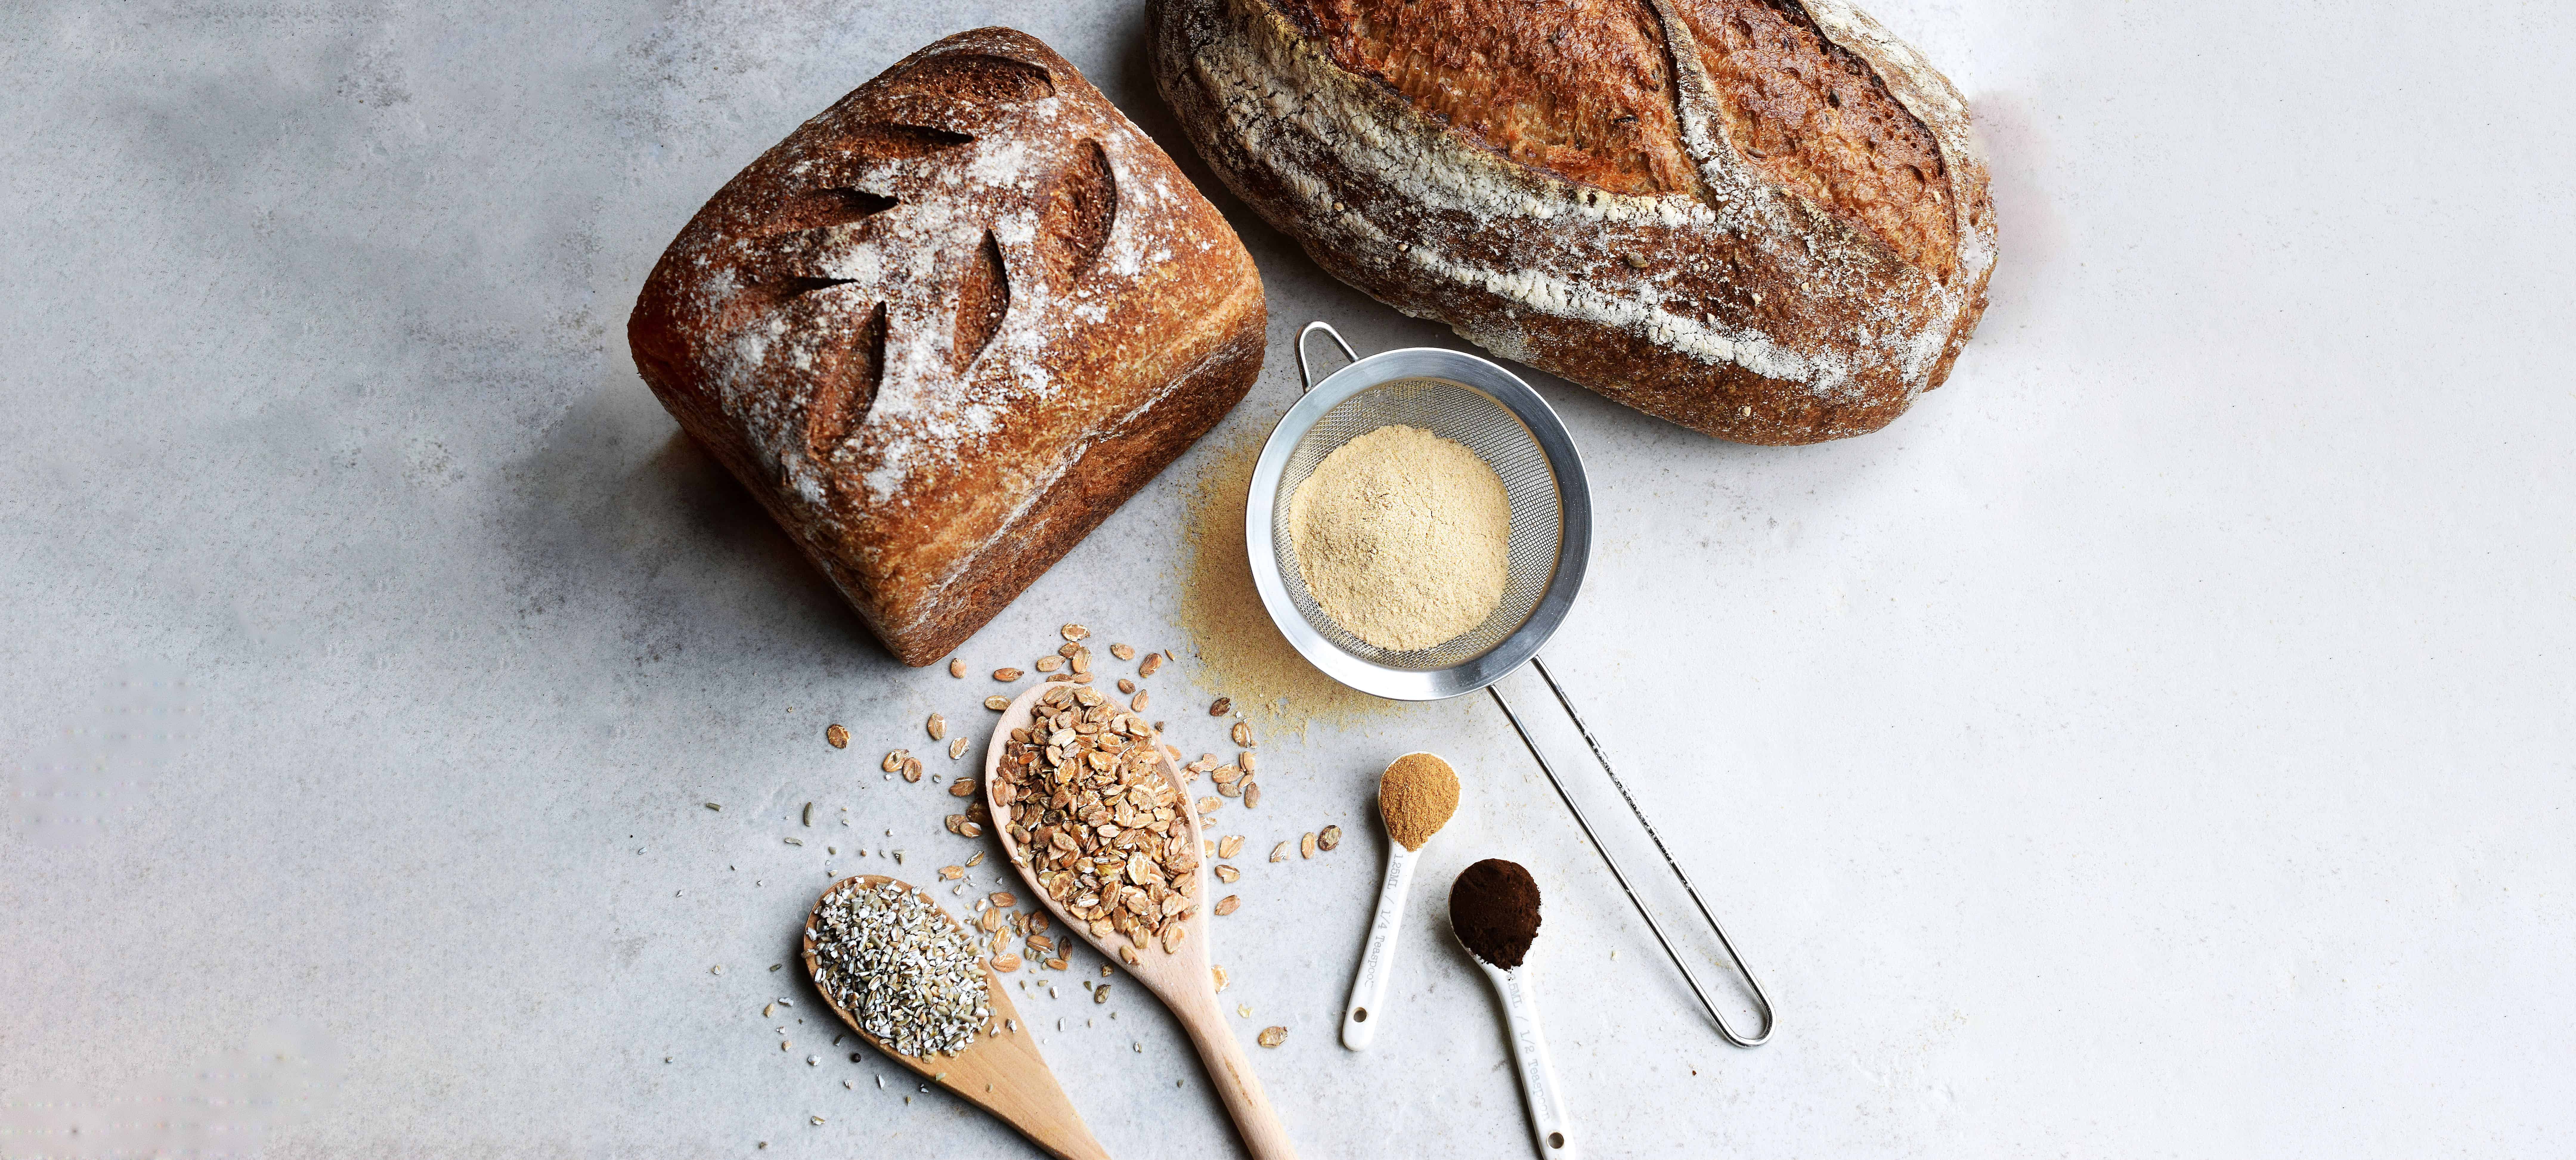 EDME malted ingredients for artisan breads extended